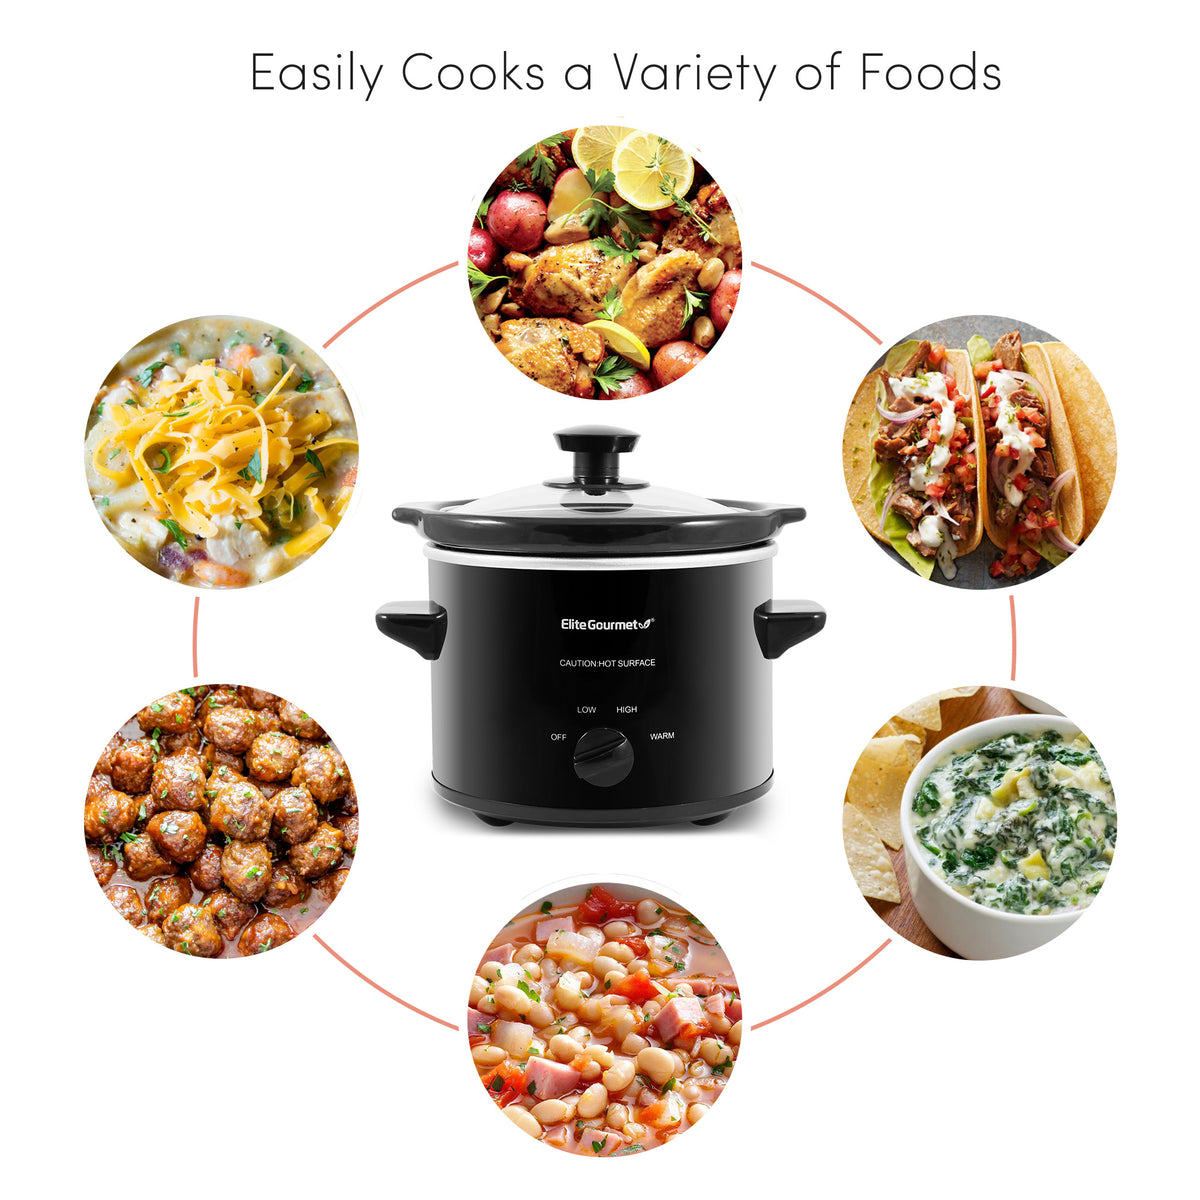 2 Qt. Electric Slow Cooker with Glass Lid – Shop Elite Gourmet